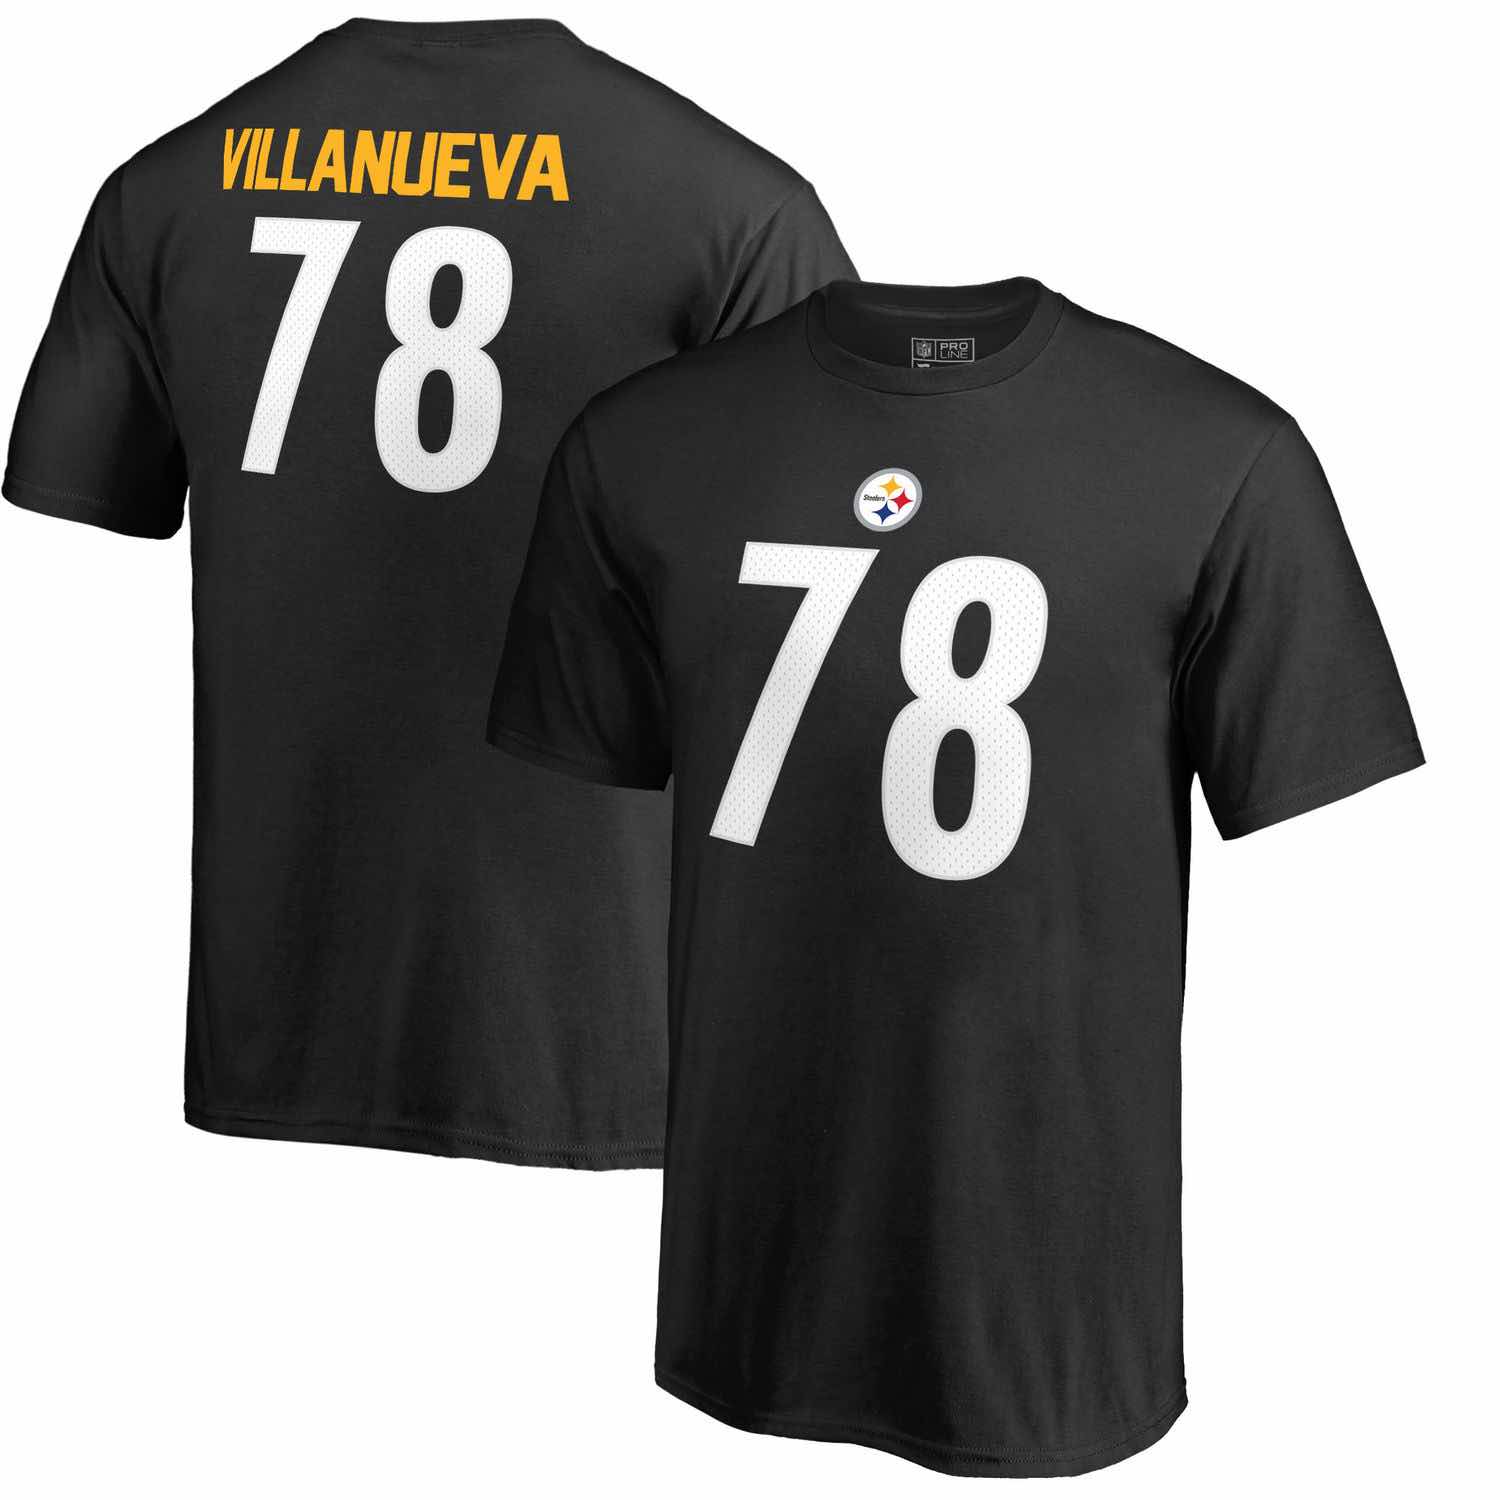 Youth Pittsburgh Steelers Alejandro Villanueva NFL Pro Line by Fanatics Branded Black Authentic Stack Name -Number T-Shirt